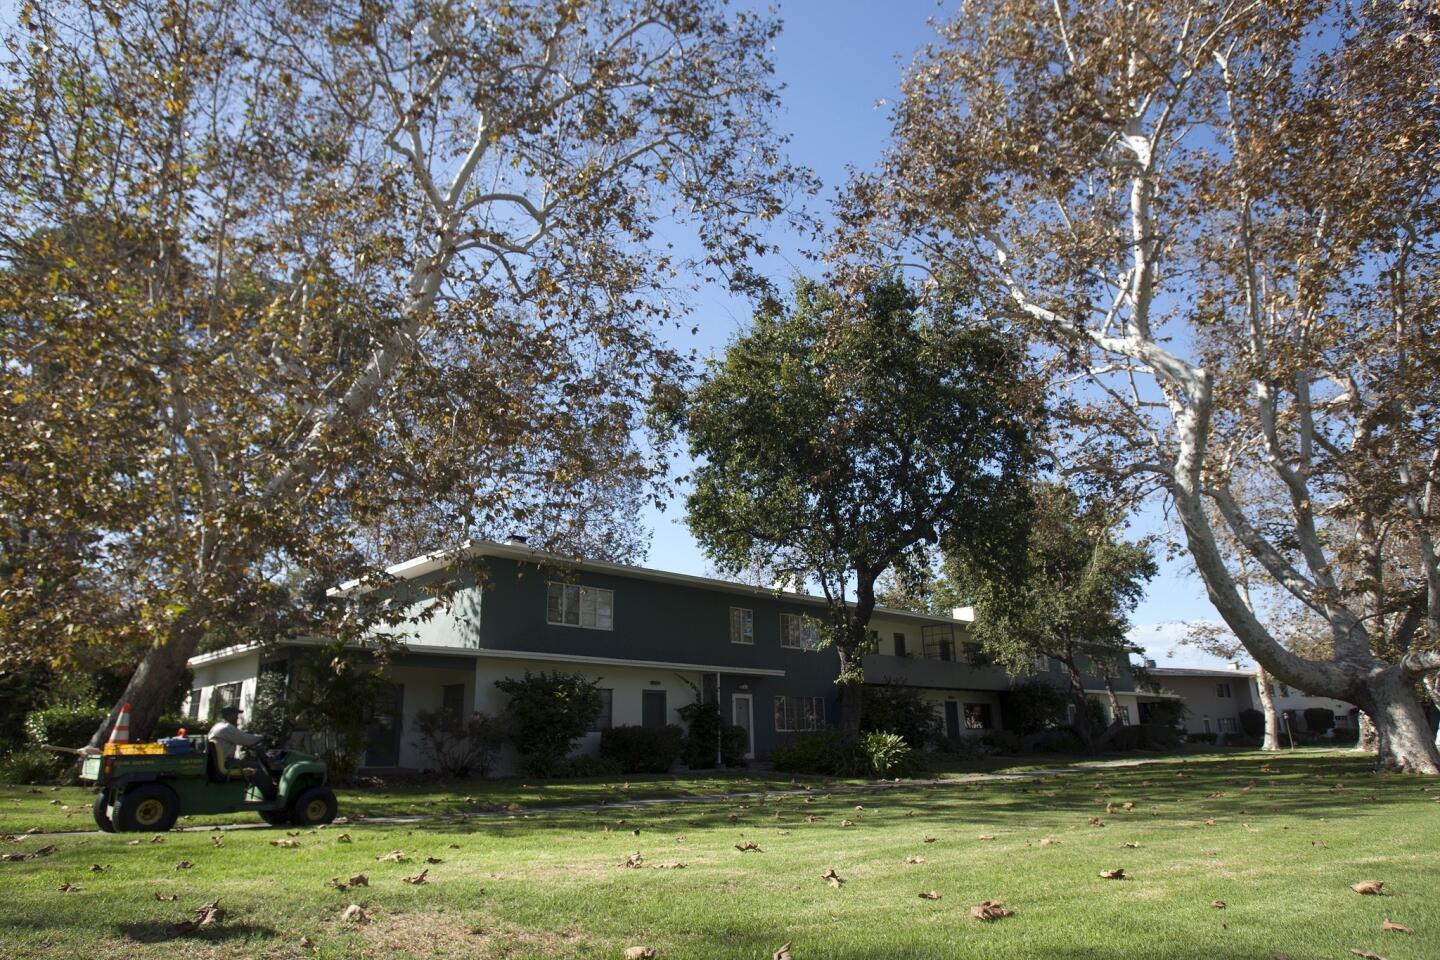 Trees surround homes at a Baldwin Hills condo, which is part of Village Green, a national historic landmark.